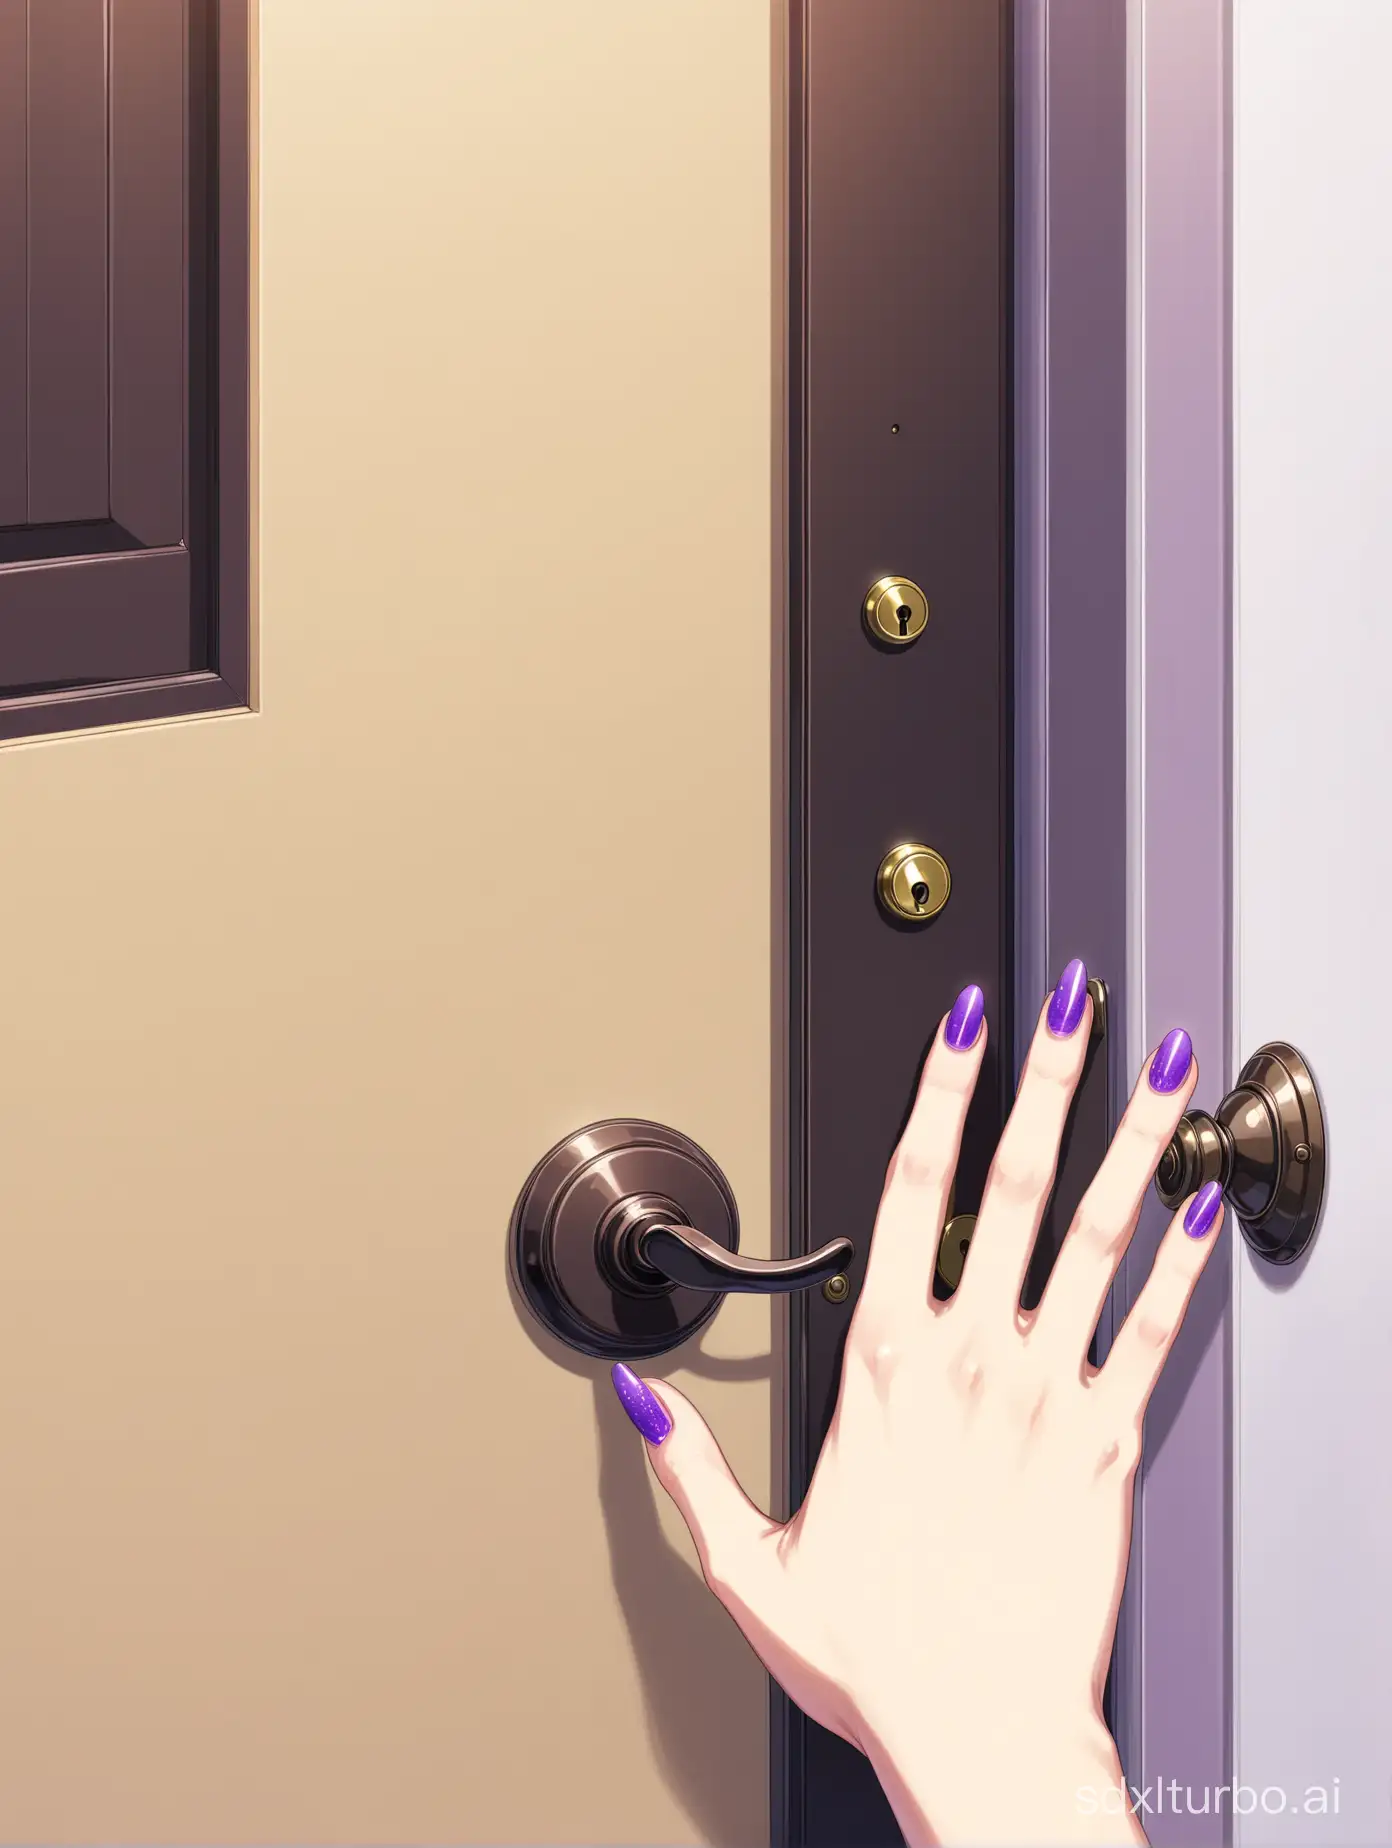 Anime-Style-Womans-Hand-Rings-Doorbell-at-Suburban-House-with-Purple-Fingernails